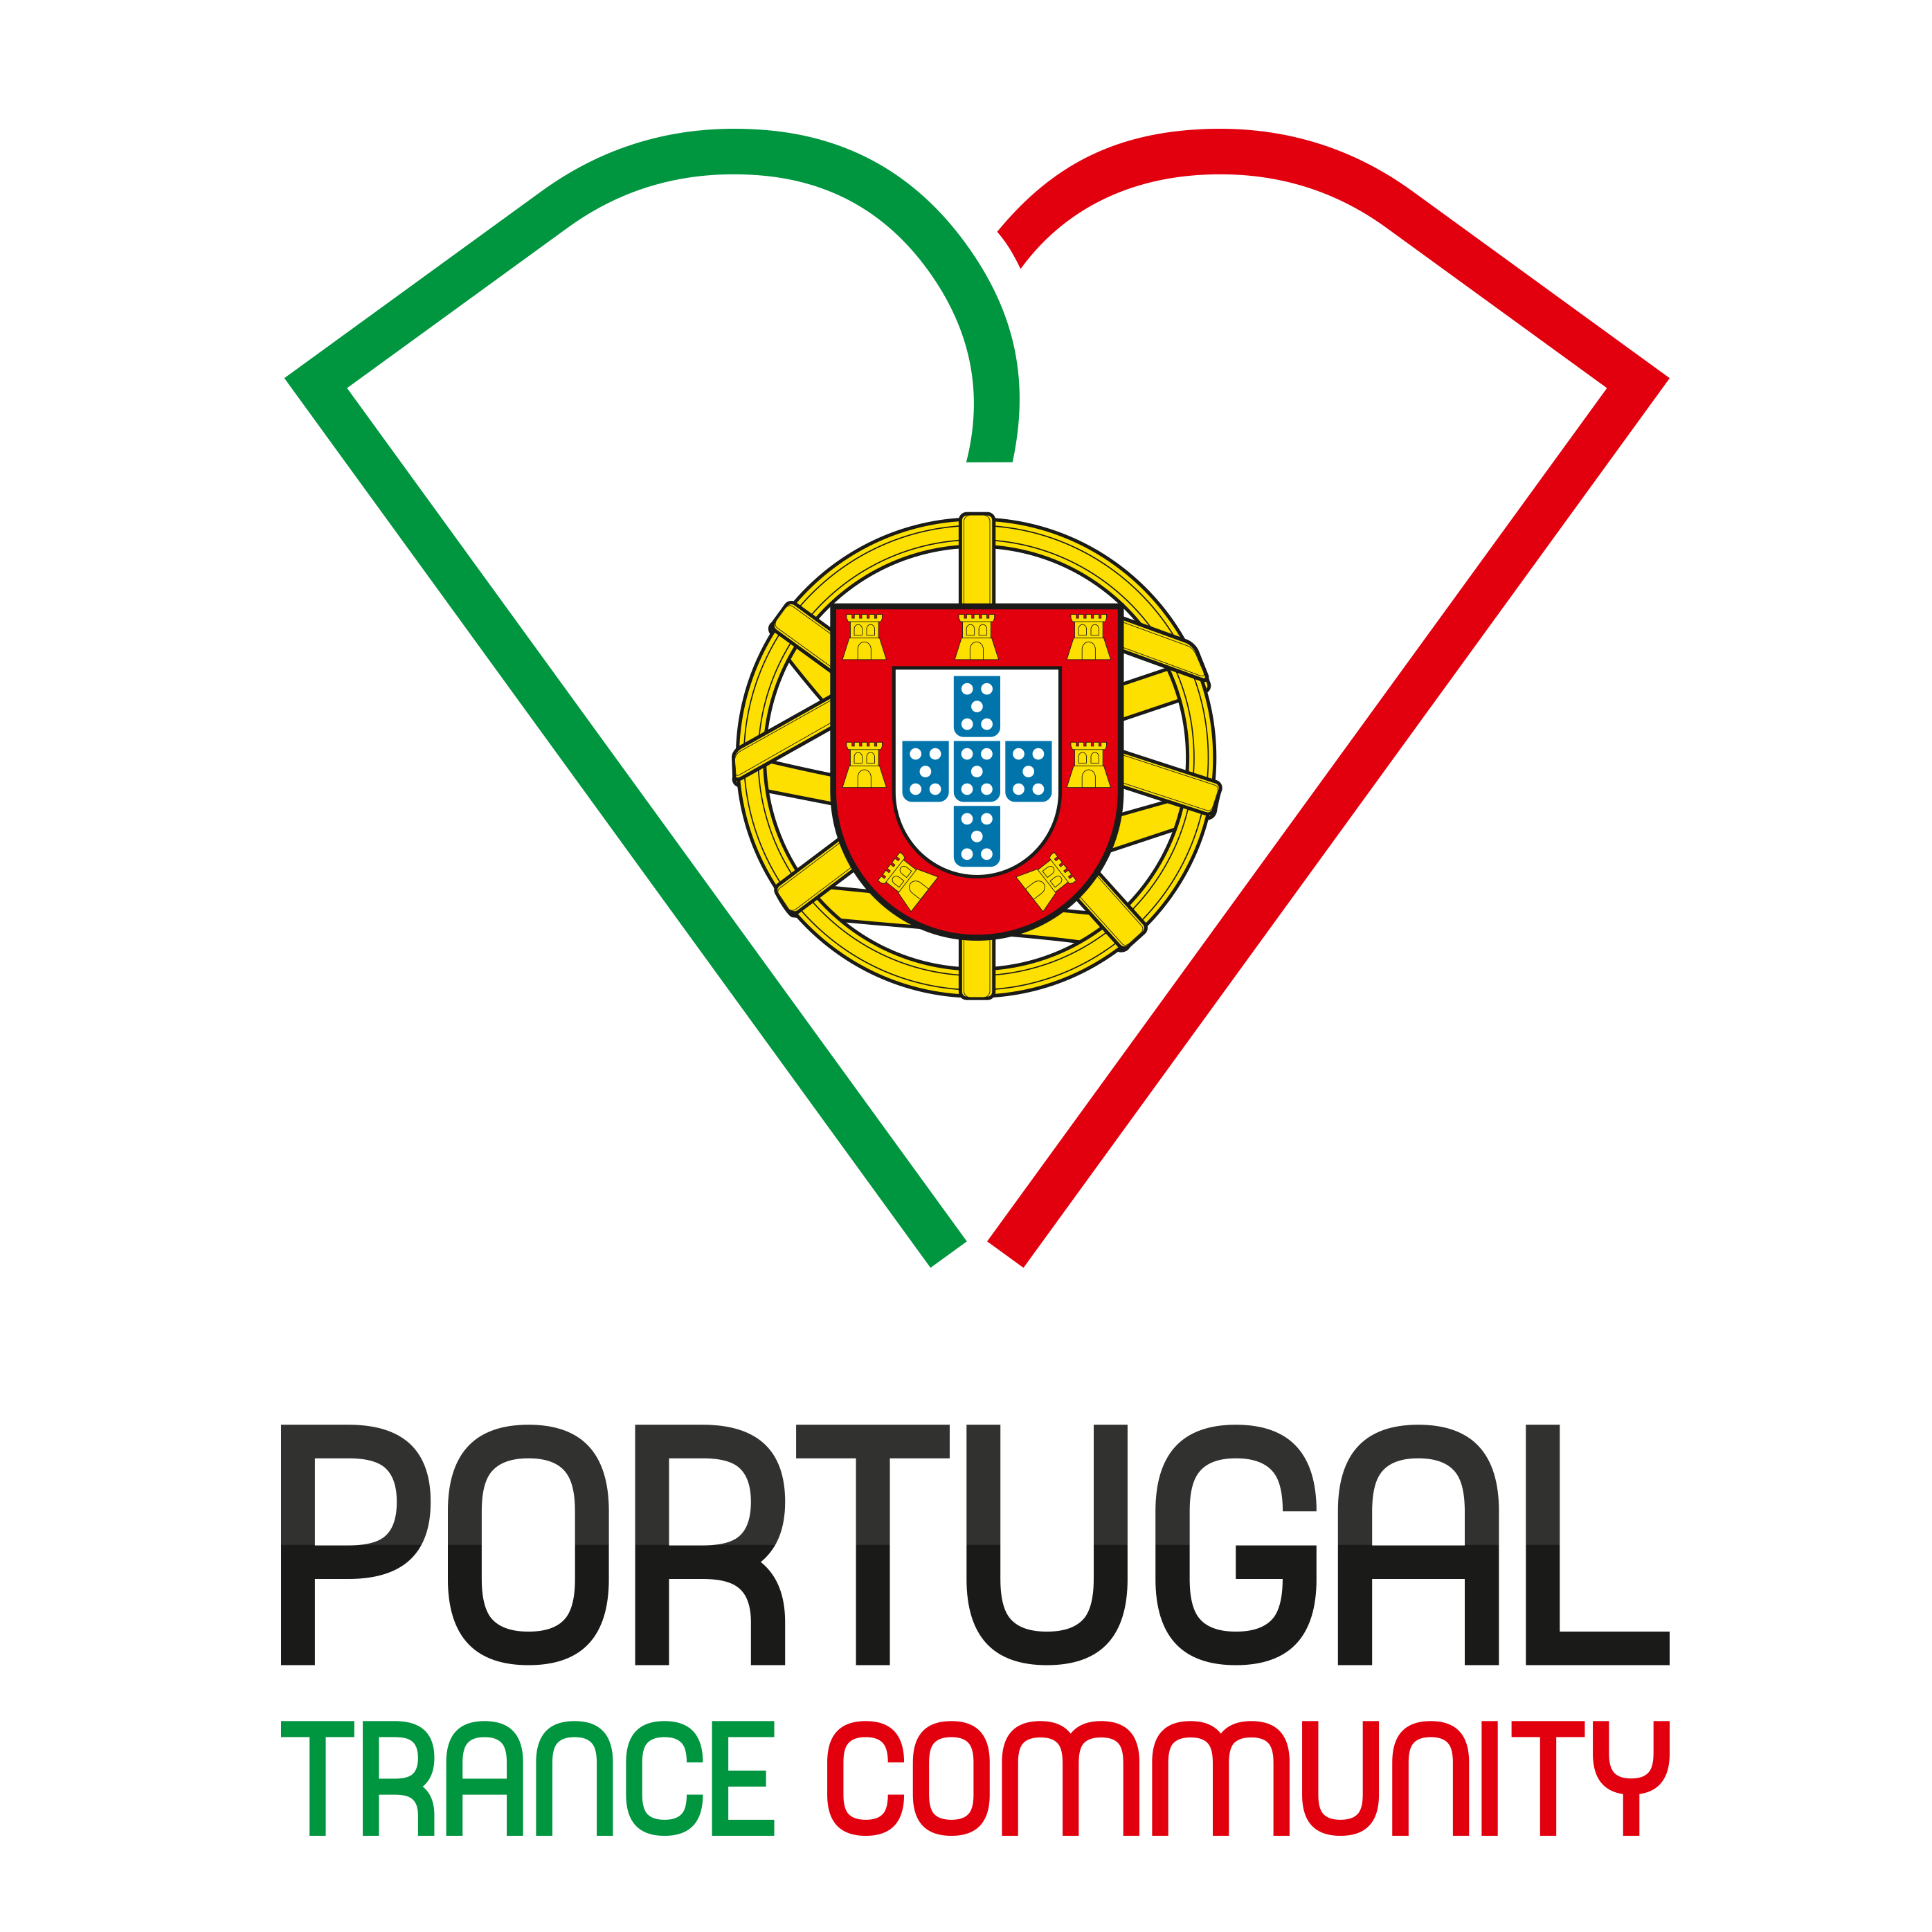 Welcome to Portugal Trance Community, here you'll discover all the Magic around Trance Music lived by Portuguese people! Follow Us Also @ https://t.co/pGuCrKAV